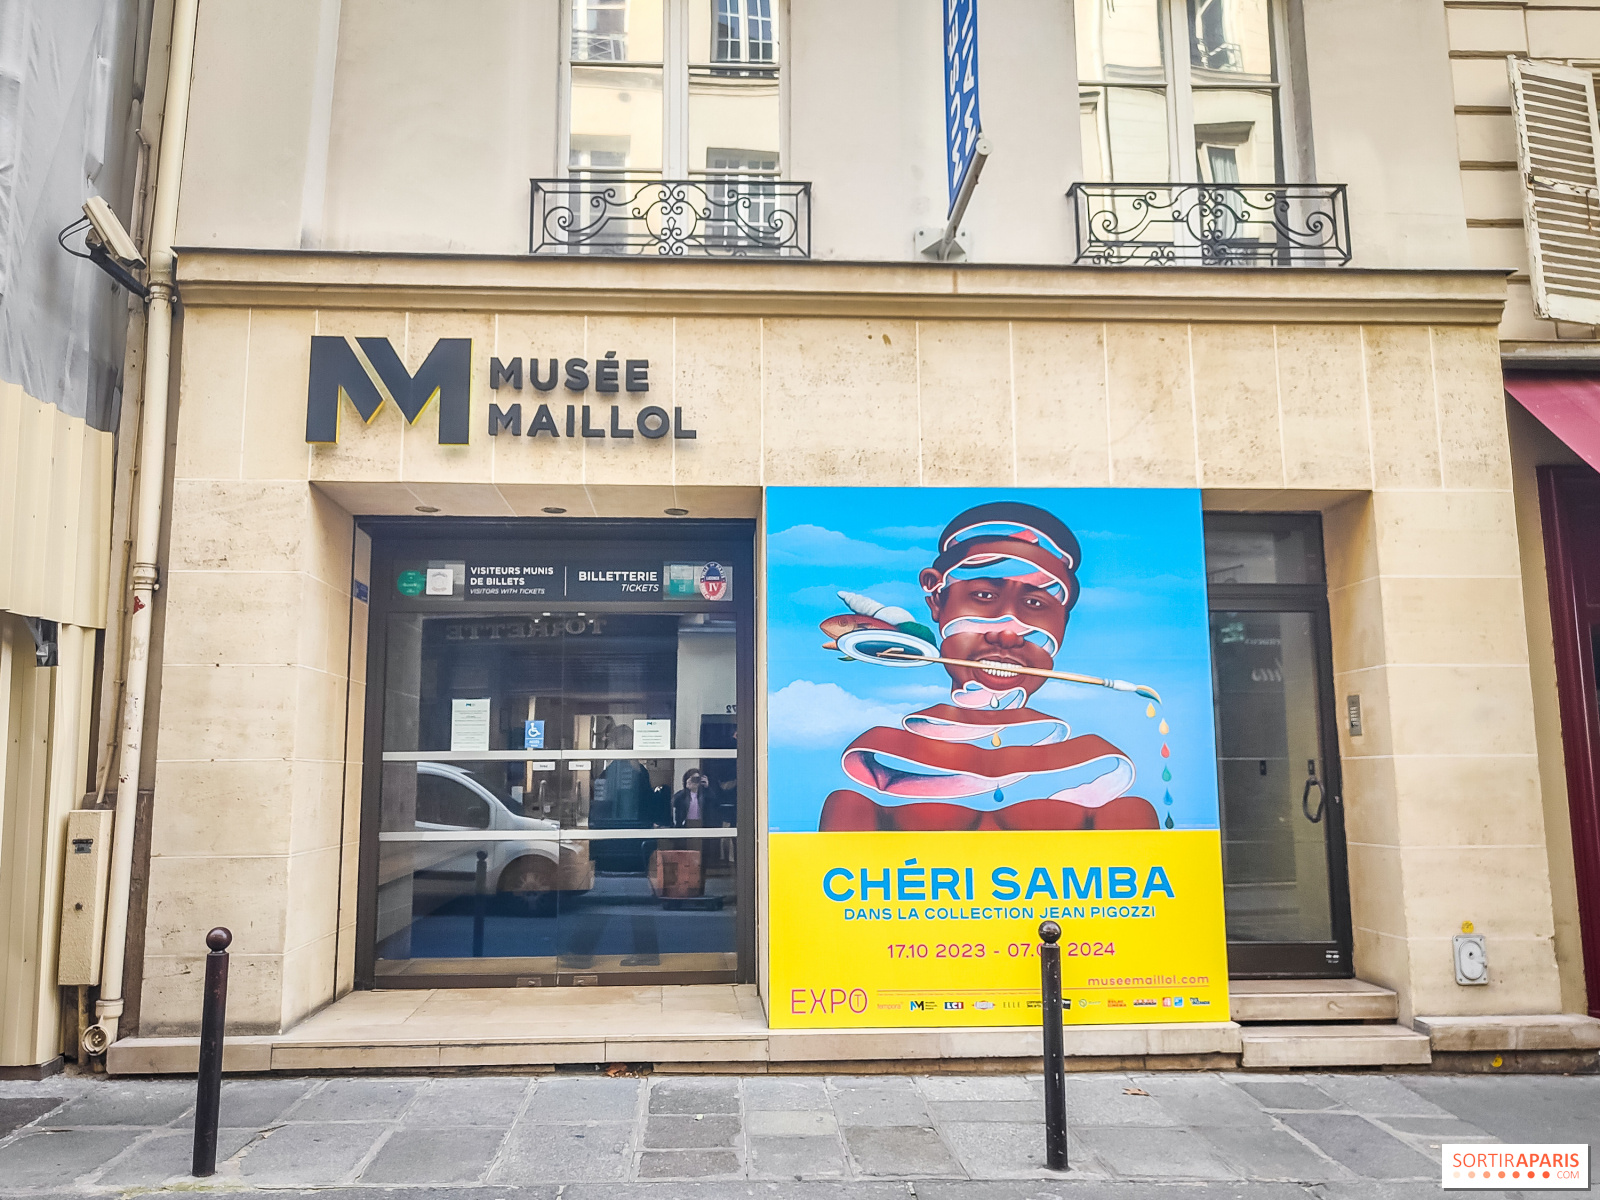 Chéri Samba, a colorful surrealist exhibition at the Musée Maillol